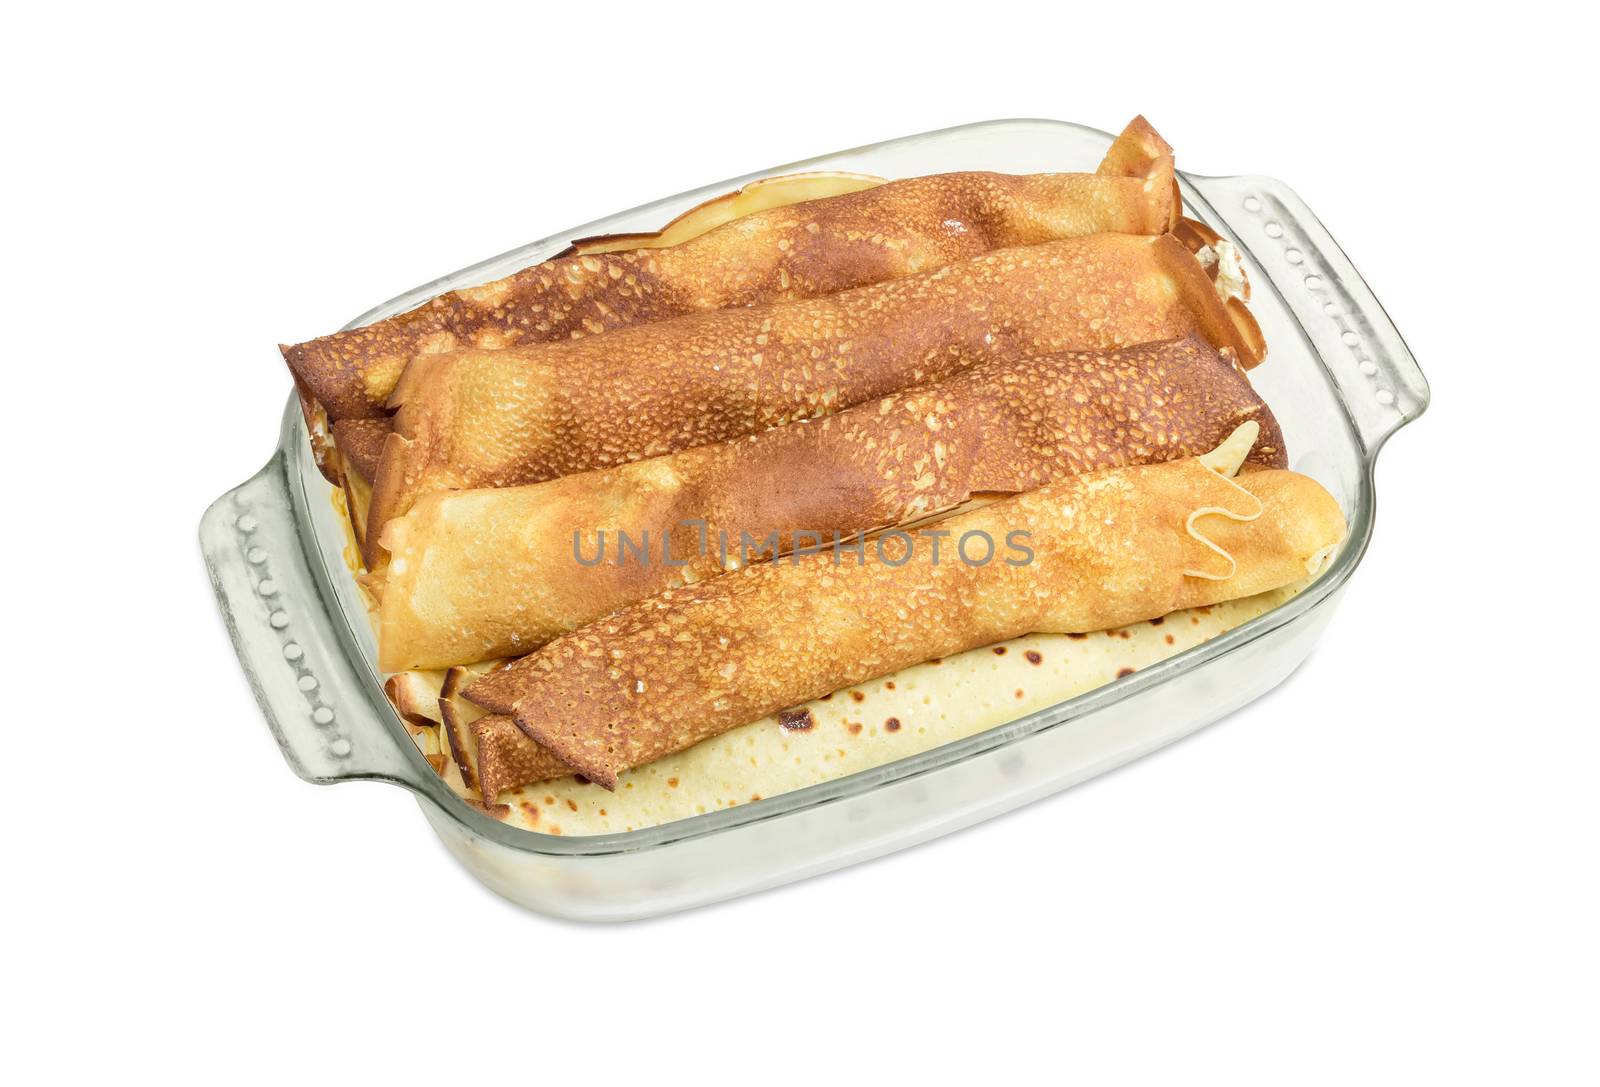 Pancakes filled with cottage cheese in the rectangular glass roasting pan on a light background
